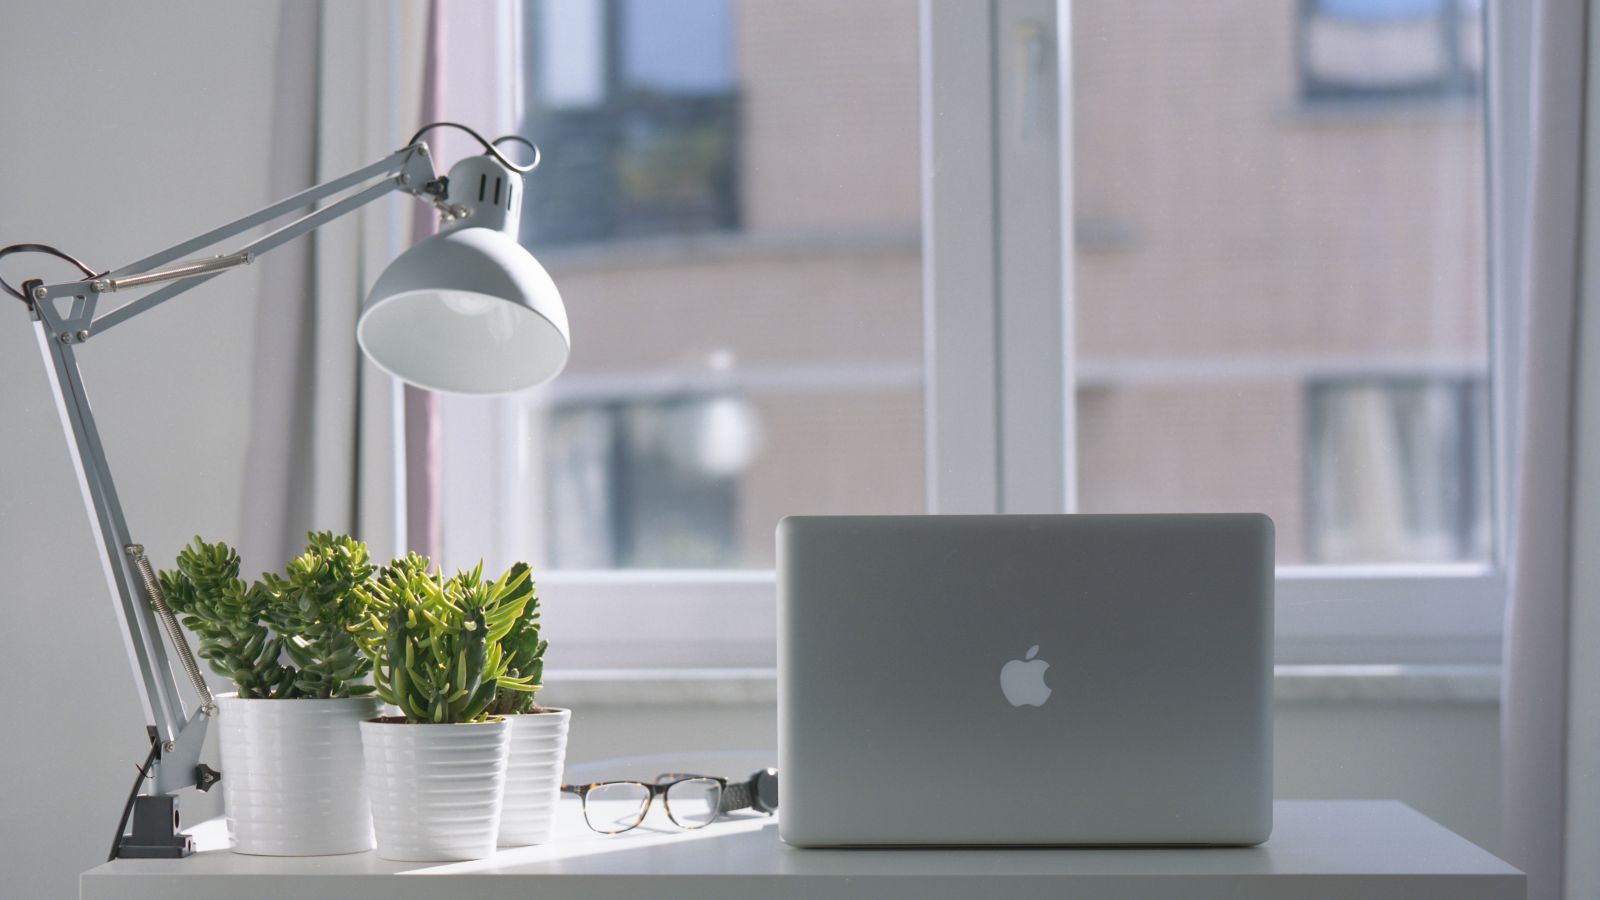 A minimalistic desk setup with a lamp, two potted plants, eyeglasses, and a laptop, in front of a window showing a building outside.